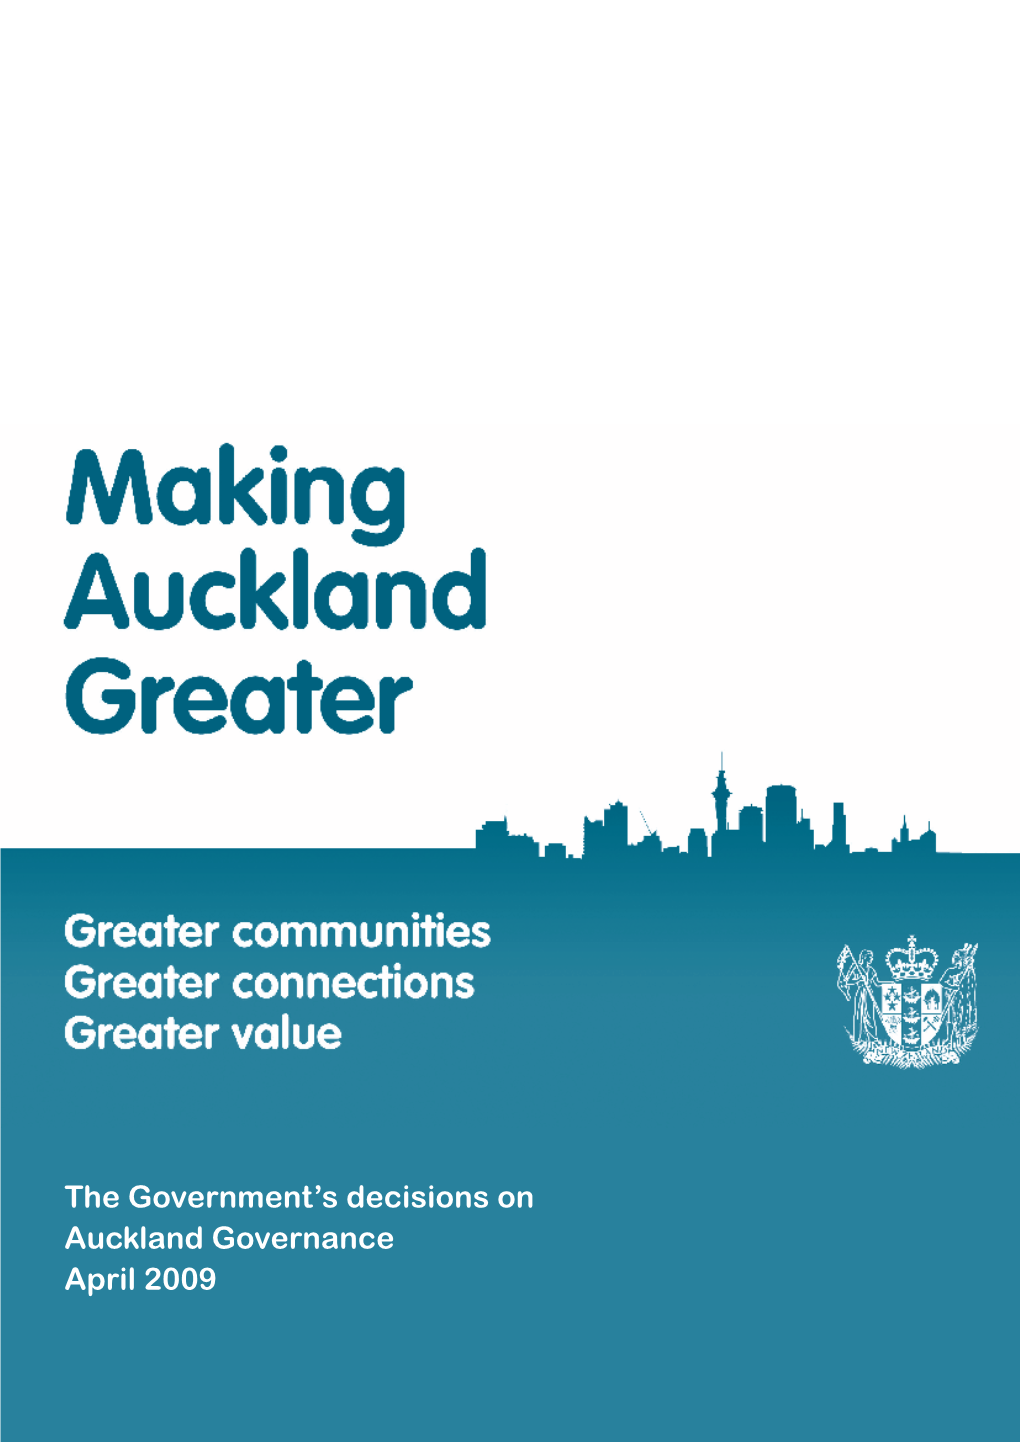 The Government's Decisions on Auckland Governance April 2009